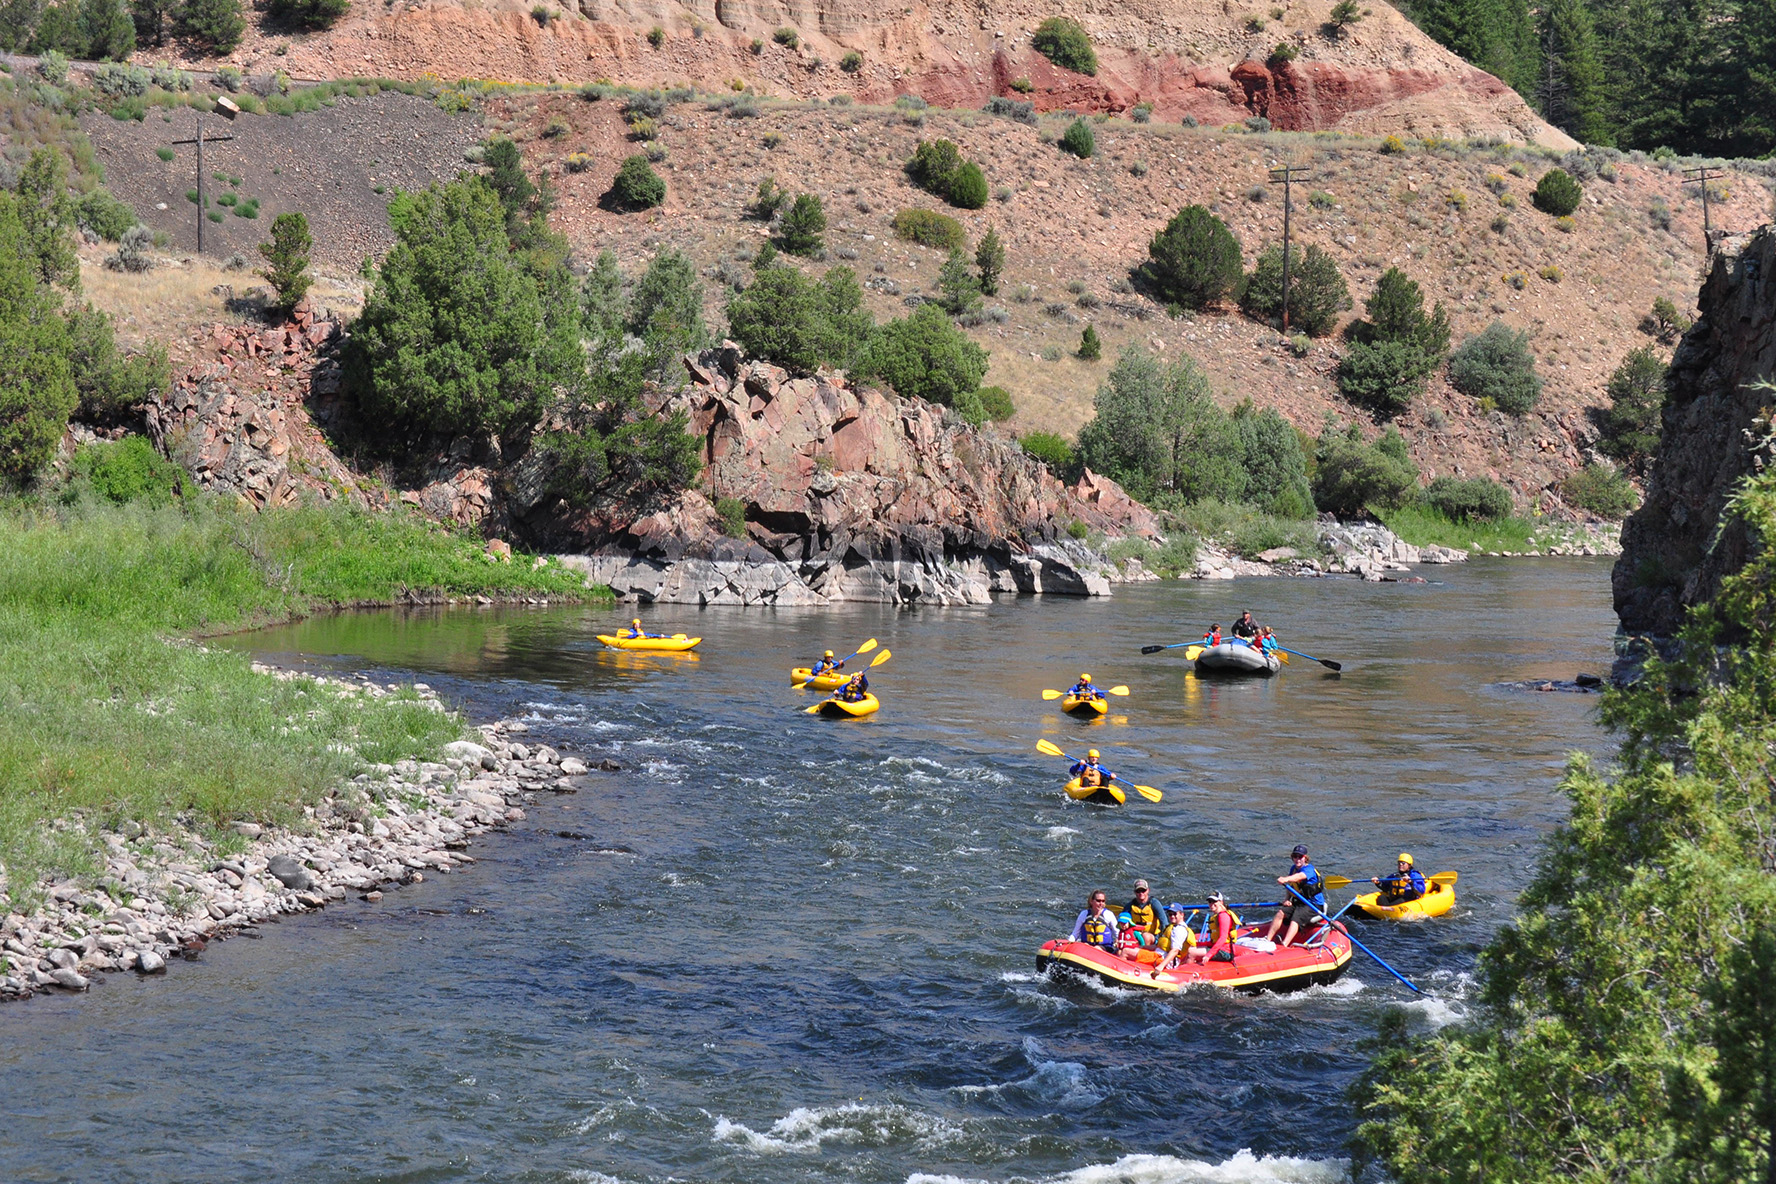 Rafting and Kayaking the upper Colorado River